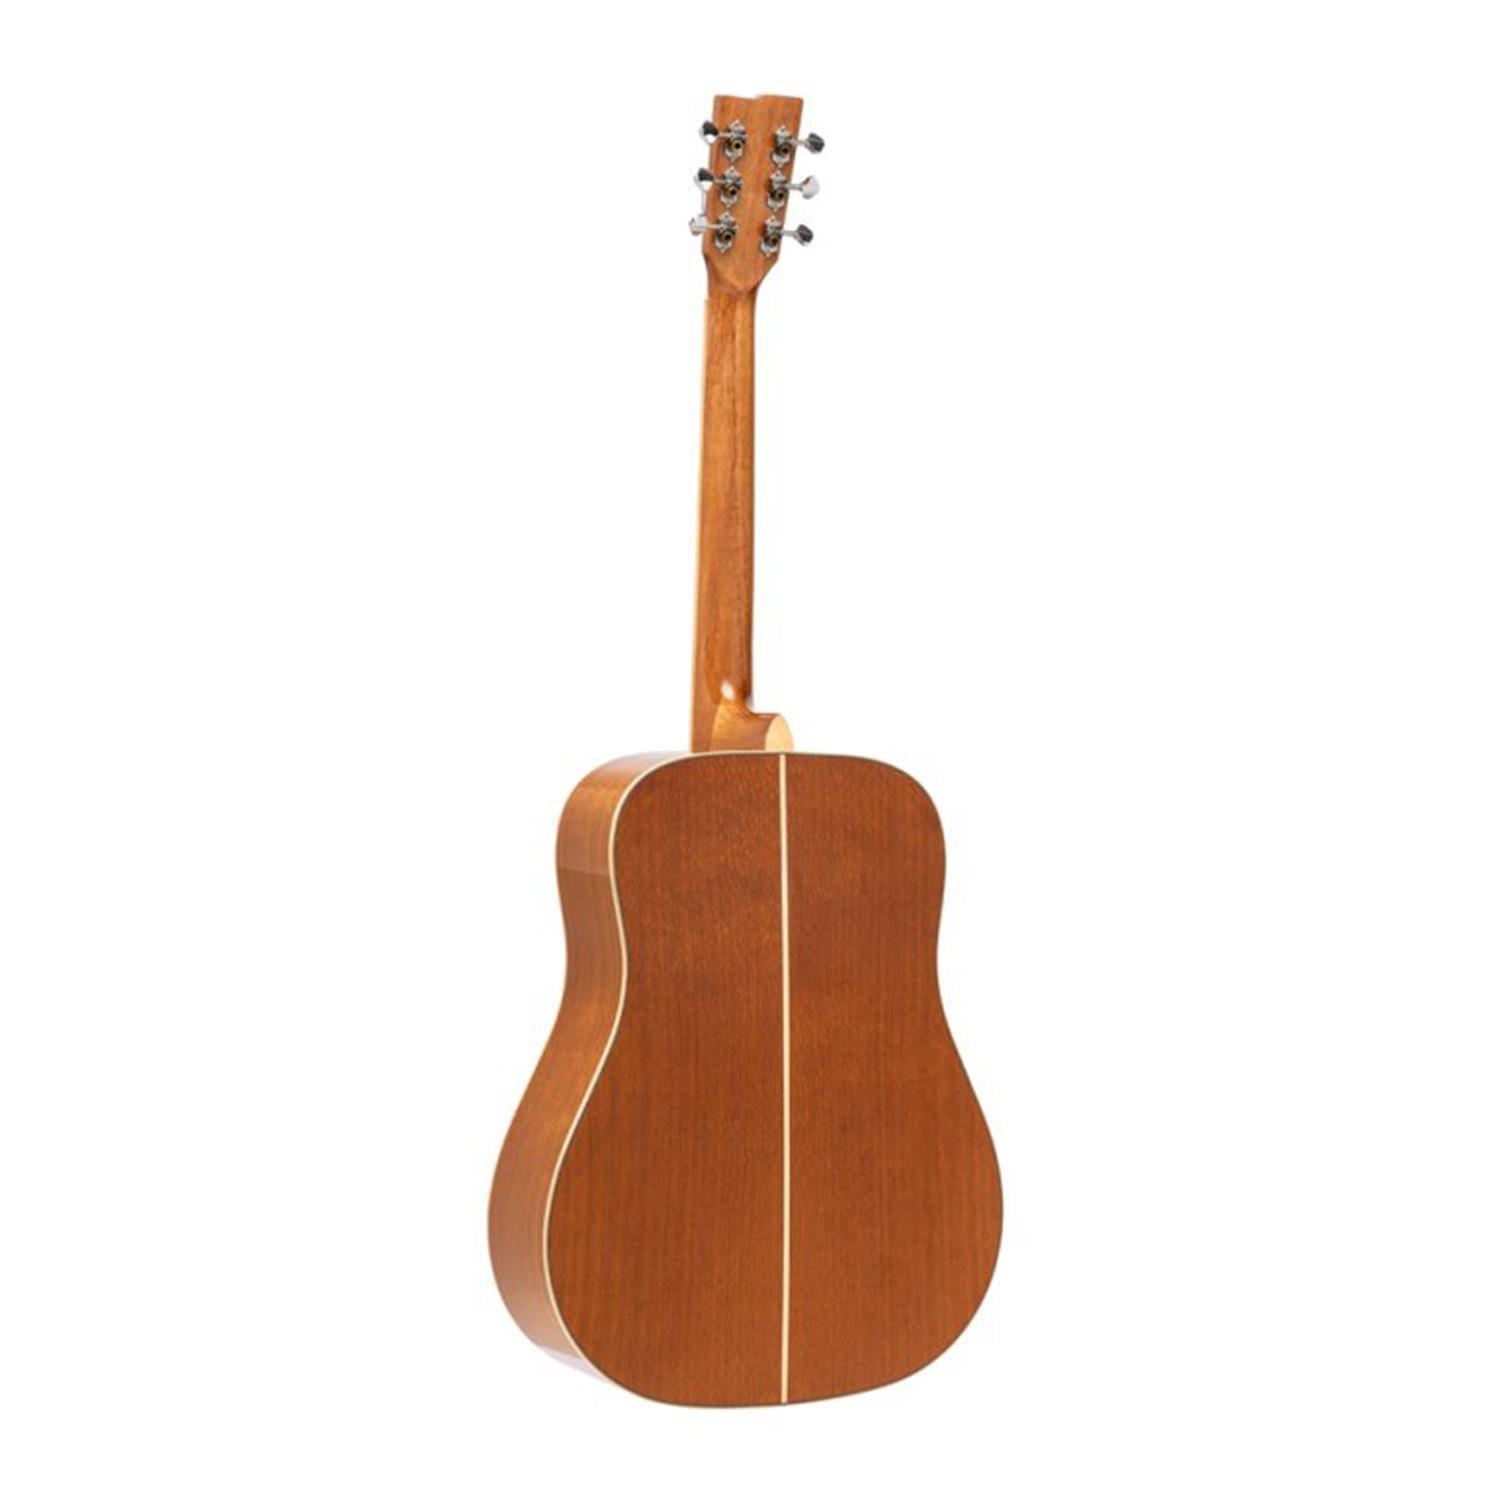 Stagg SA45 D-LW Series 45 Natural Dreadnought Acoustic Guitar with Spruce Top - DY Pro Audio